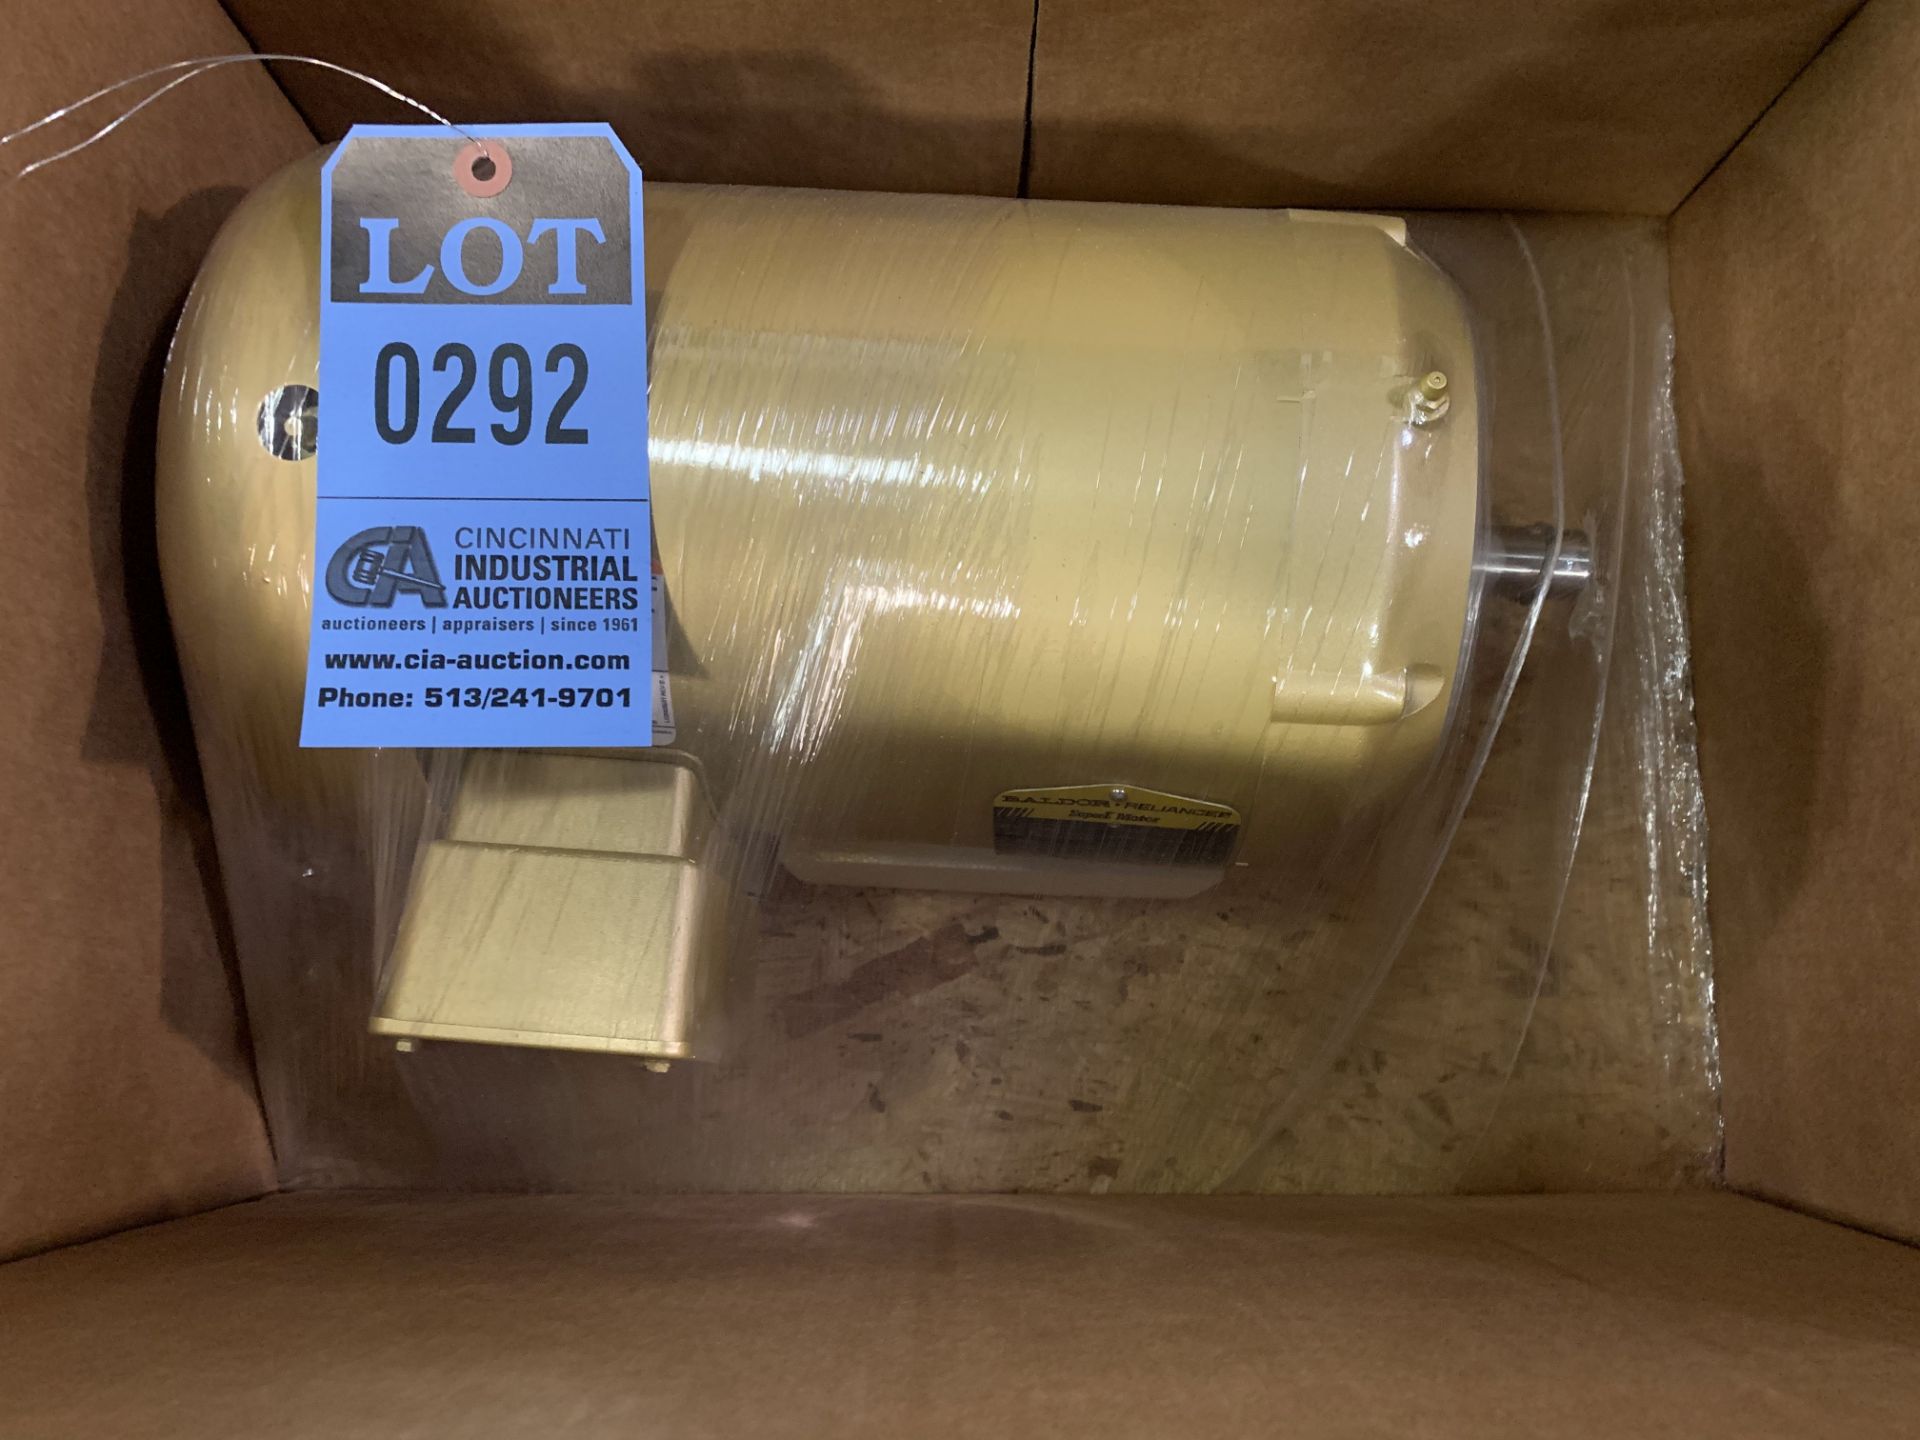 3 HP BALDOR ELECTRIC MOTOR - NEW **LOCATED AT 1711 KIMBERLY PARK DRIVE**